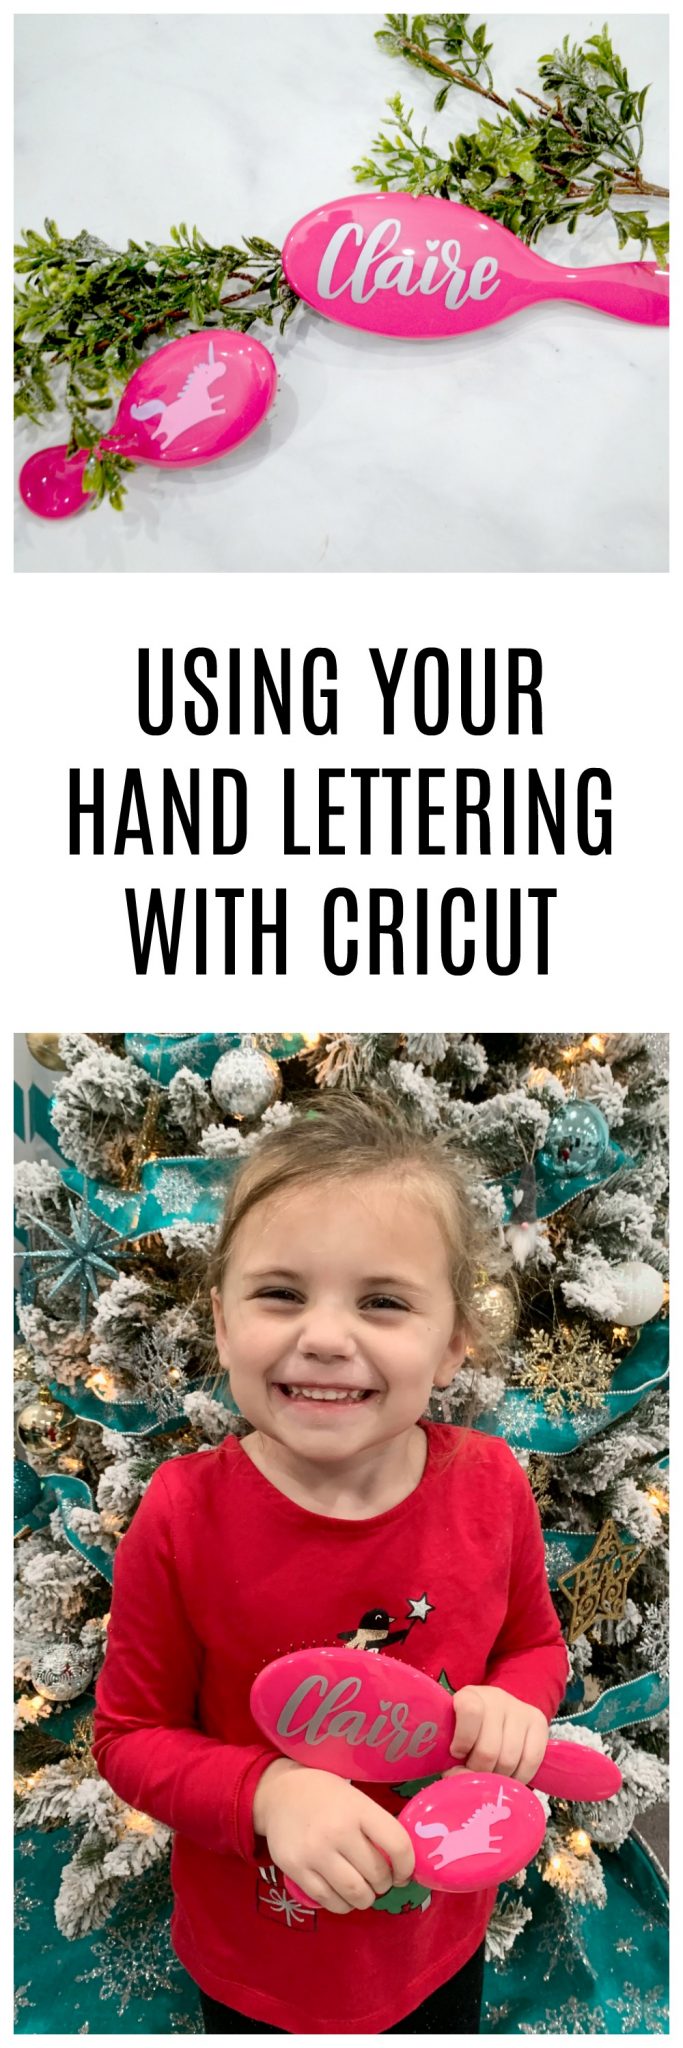 Using Your Hand Lettering with Cricut